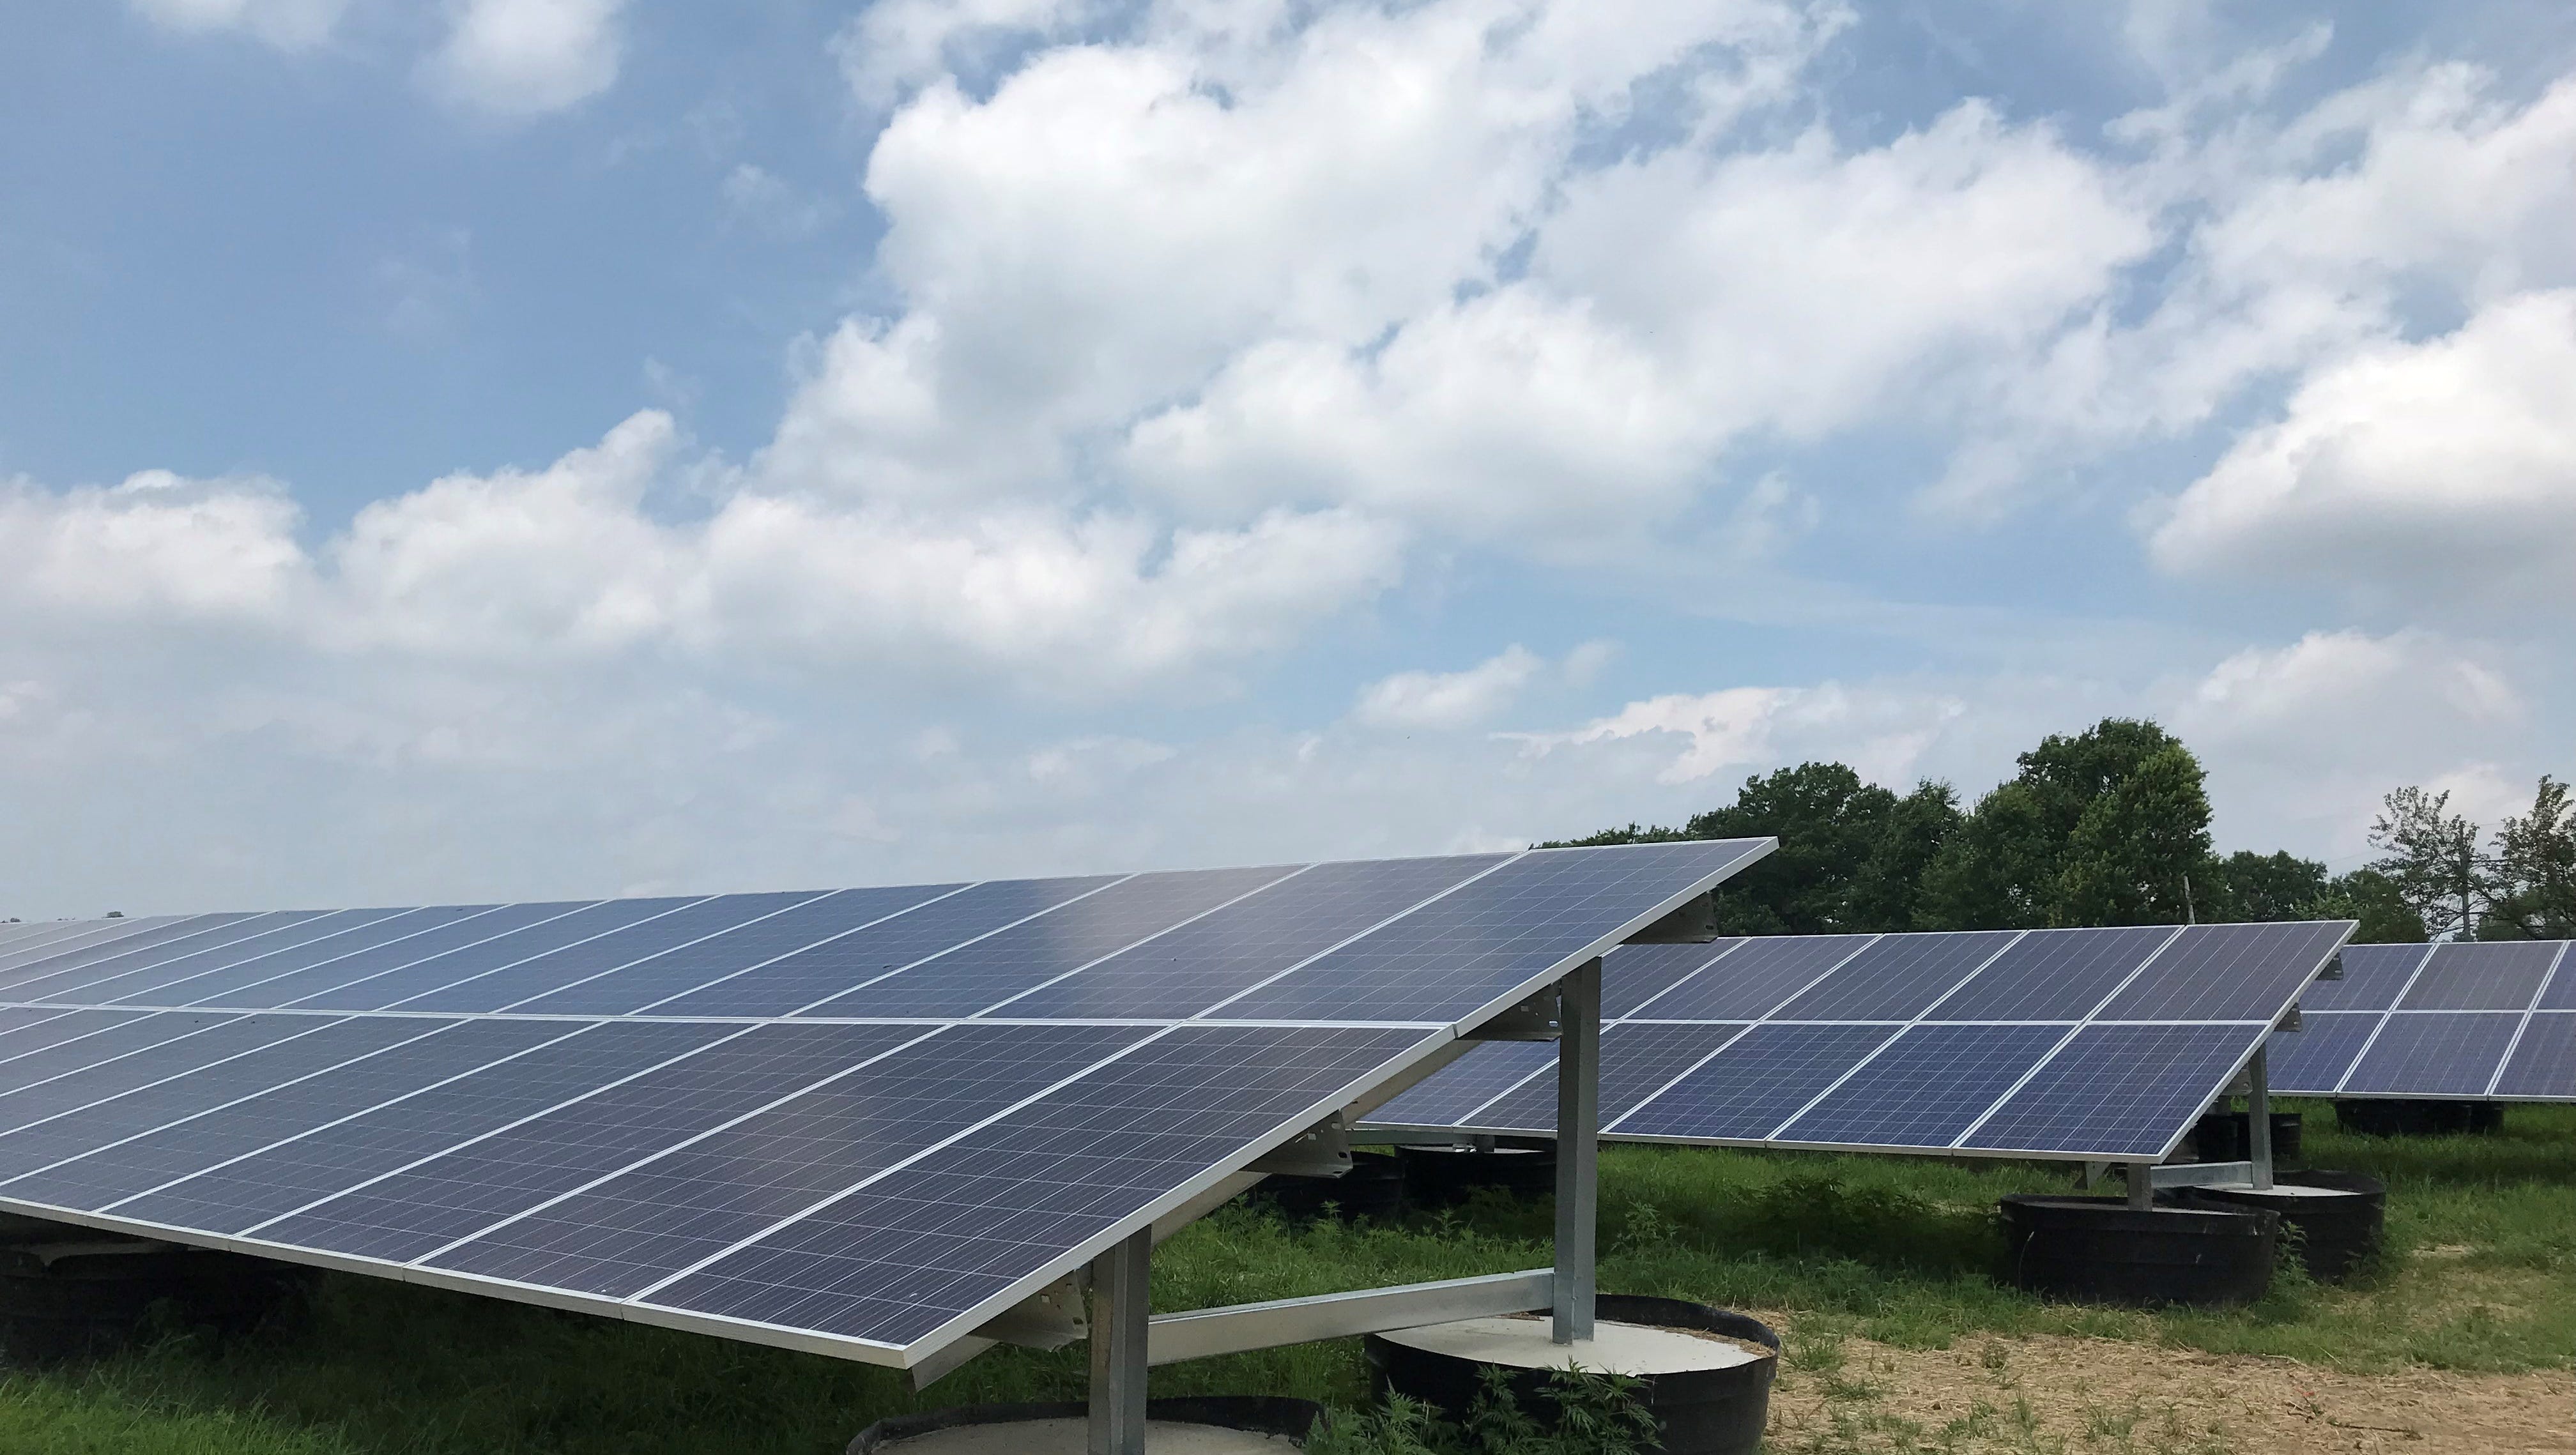 Community solar power project in place of a landfill